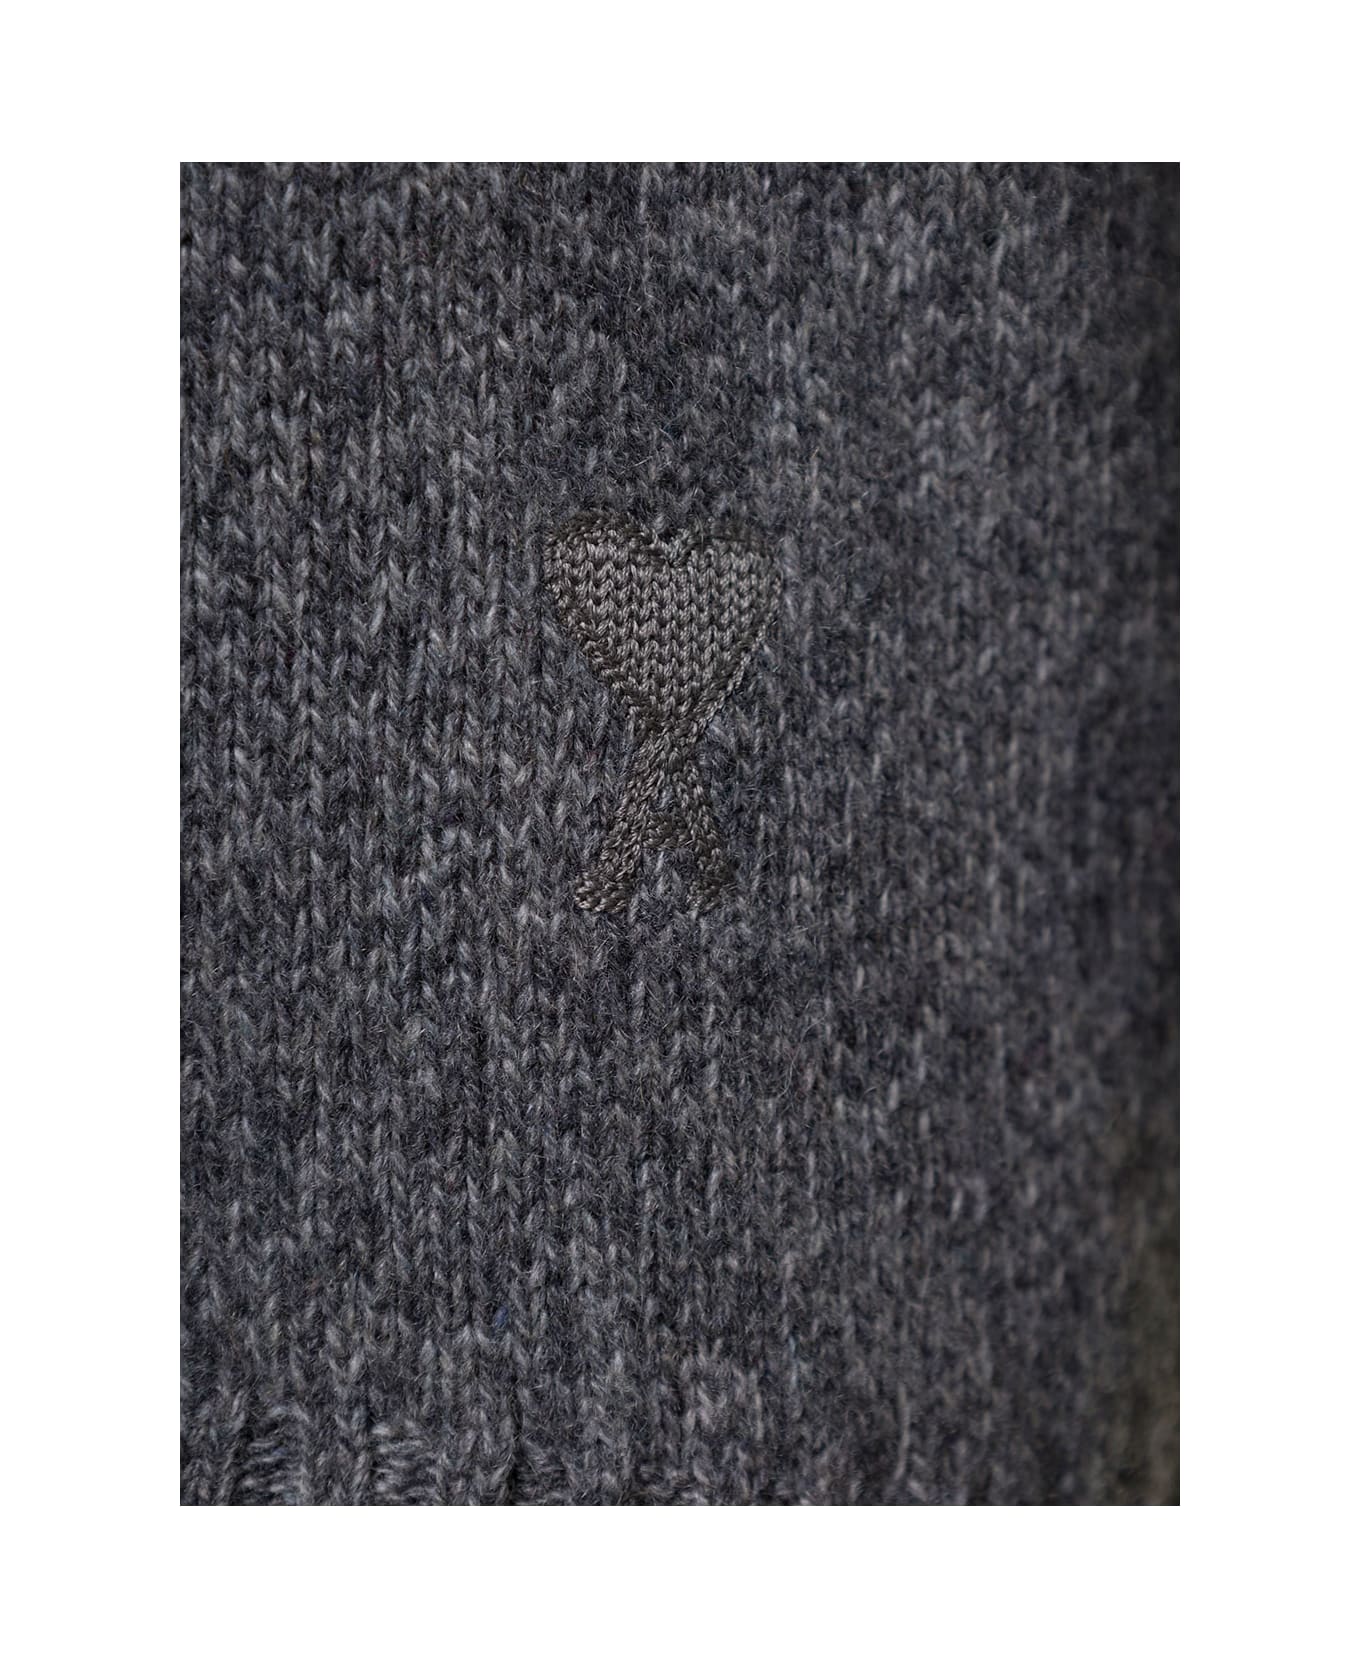 Ami Alexandre Mattiussi Grey Crewneck Sweater With Tonal Adc Embroidery In Cashmere And Wool Woman - Grey